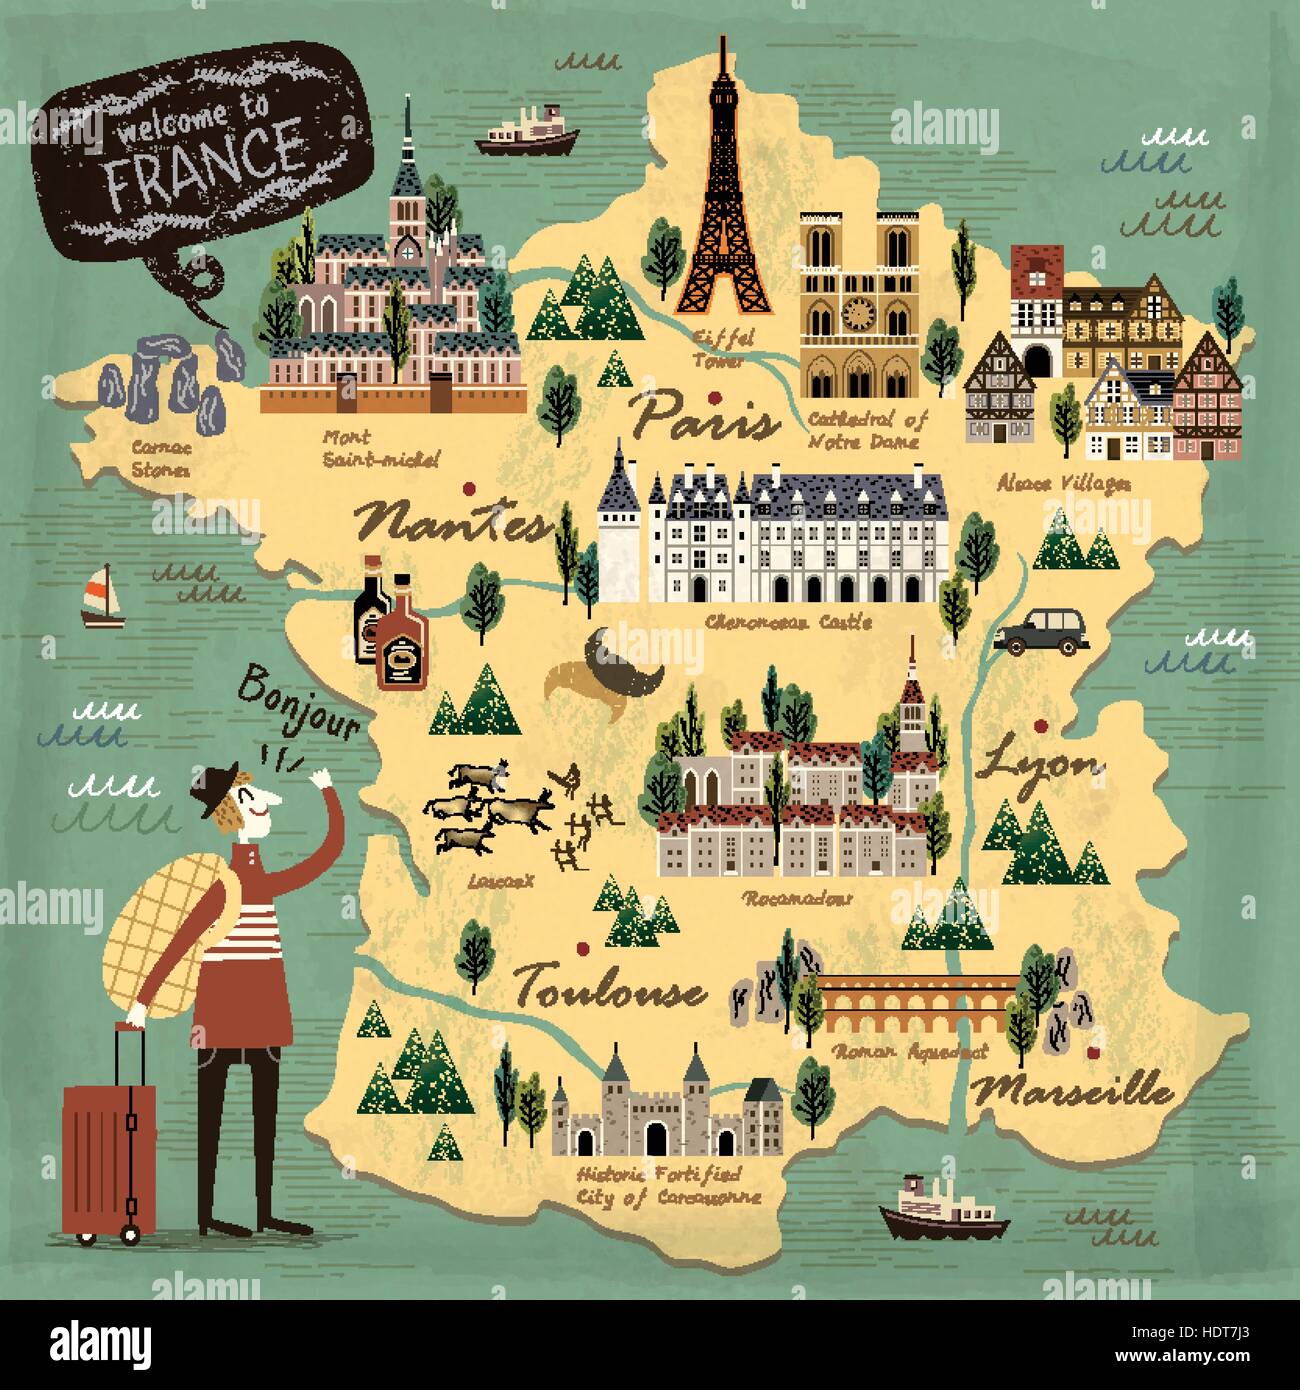 Welcome to France-My Landmark Travel Journal